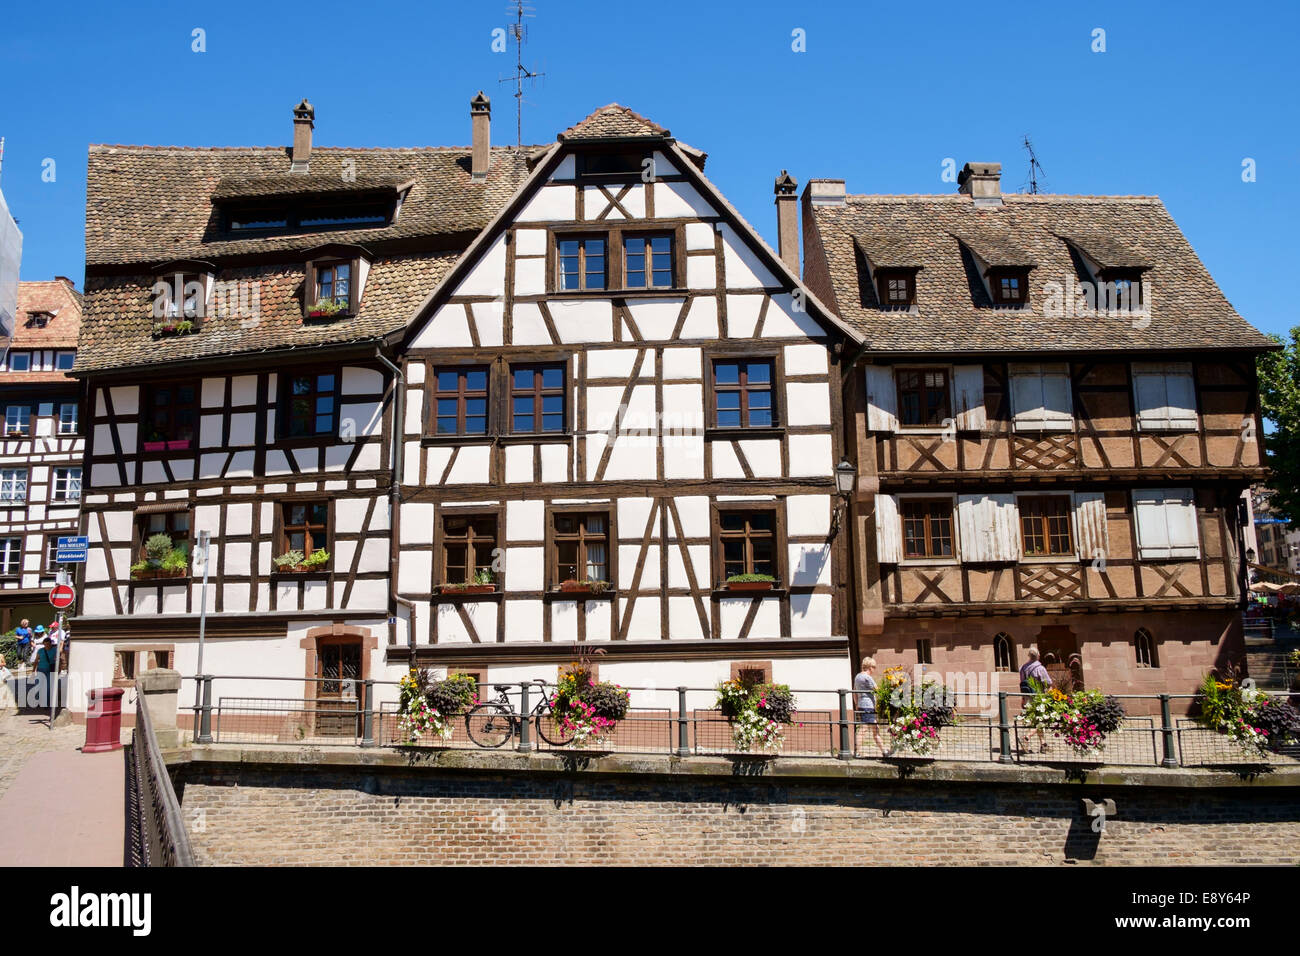 Beautiful medieval houses in Petite France district of Strasbourg, France Stock Photo